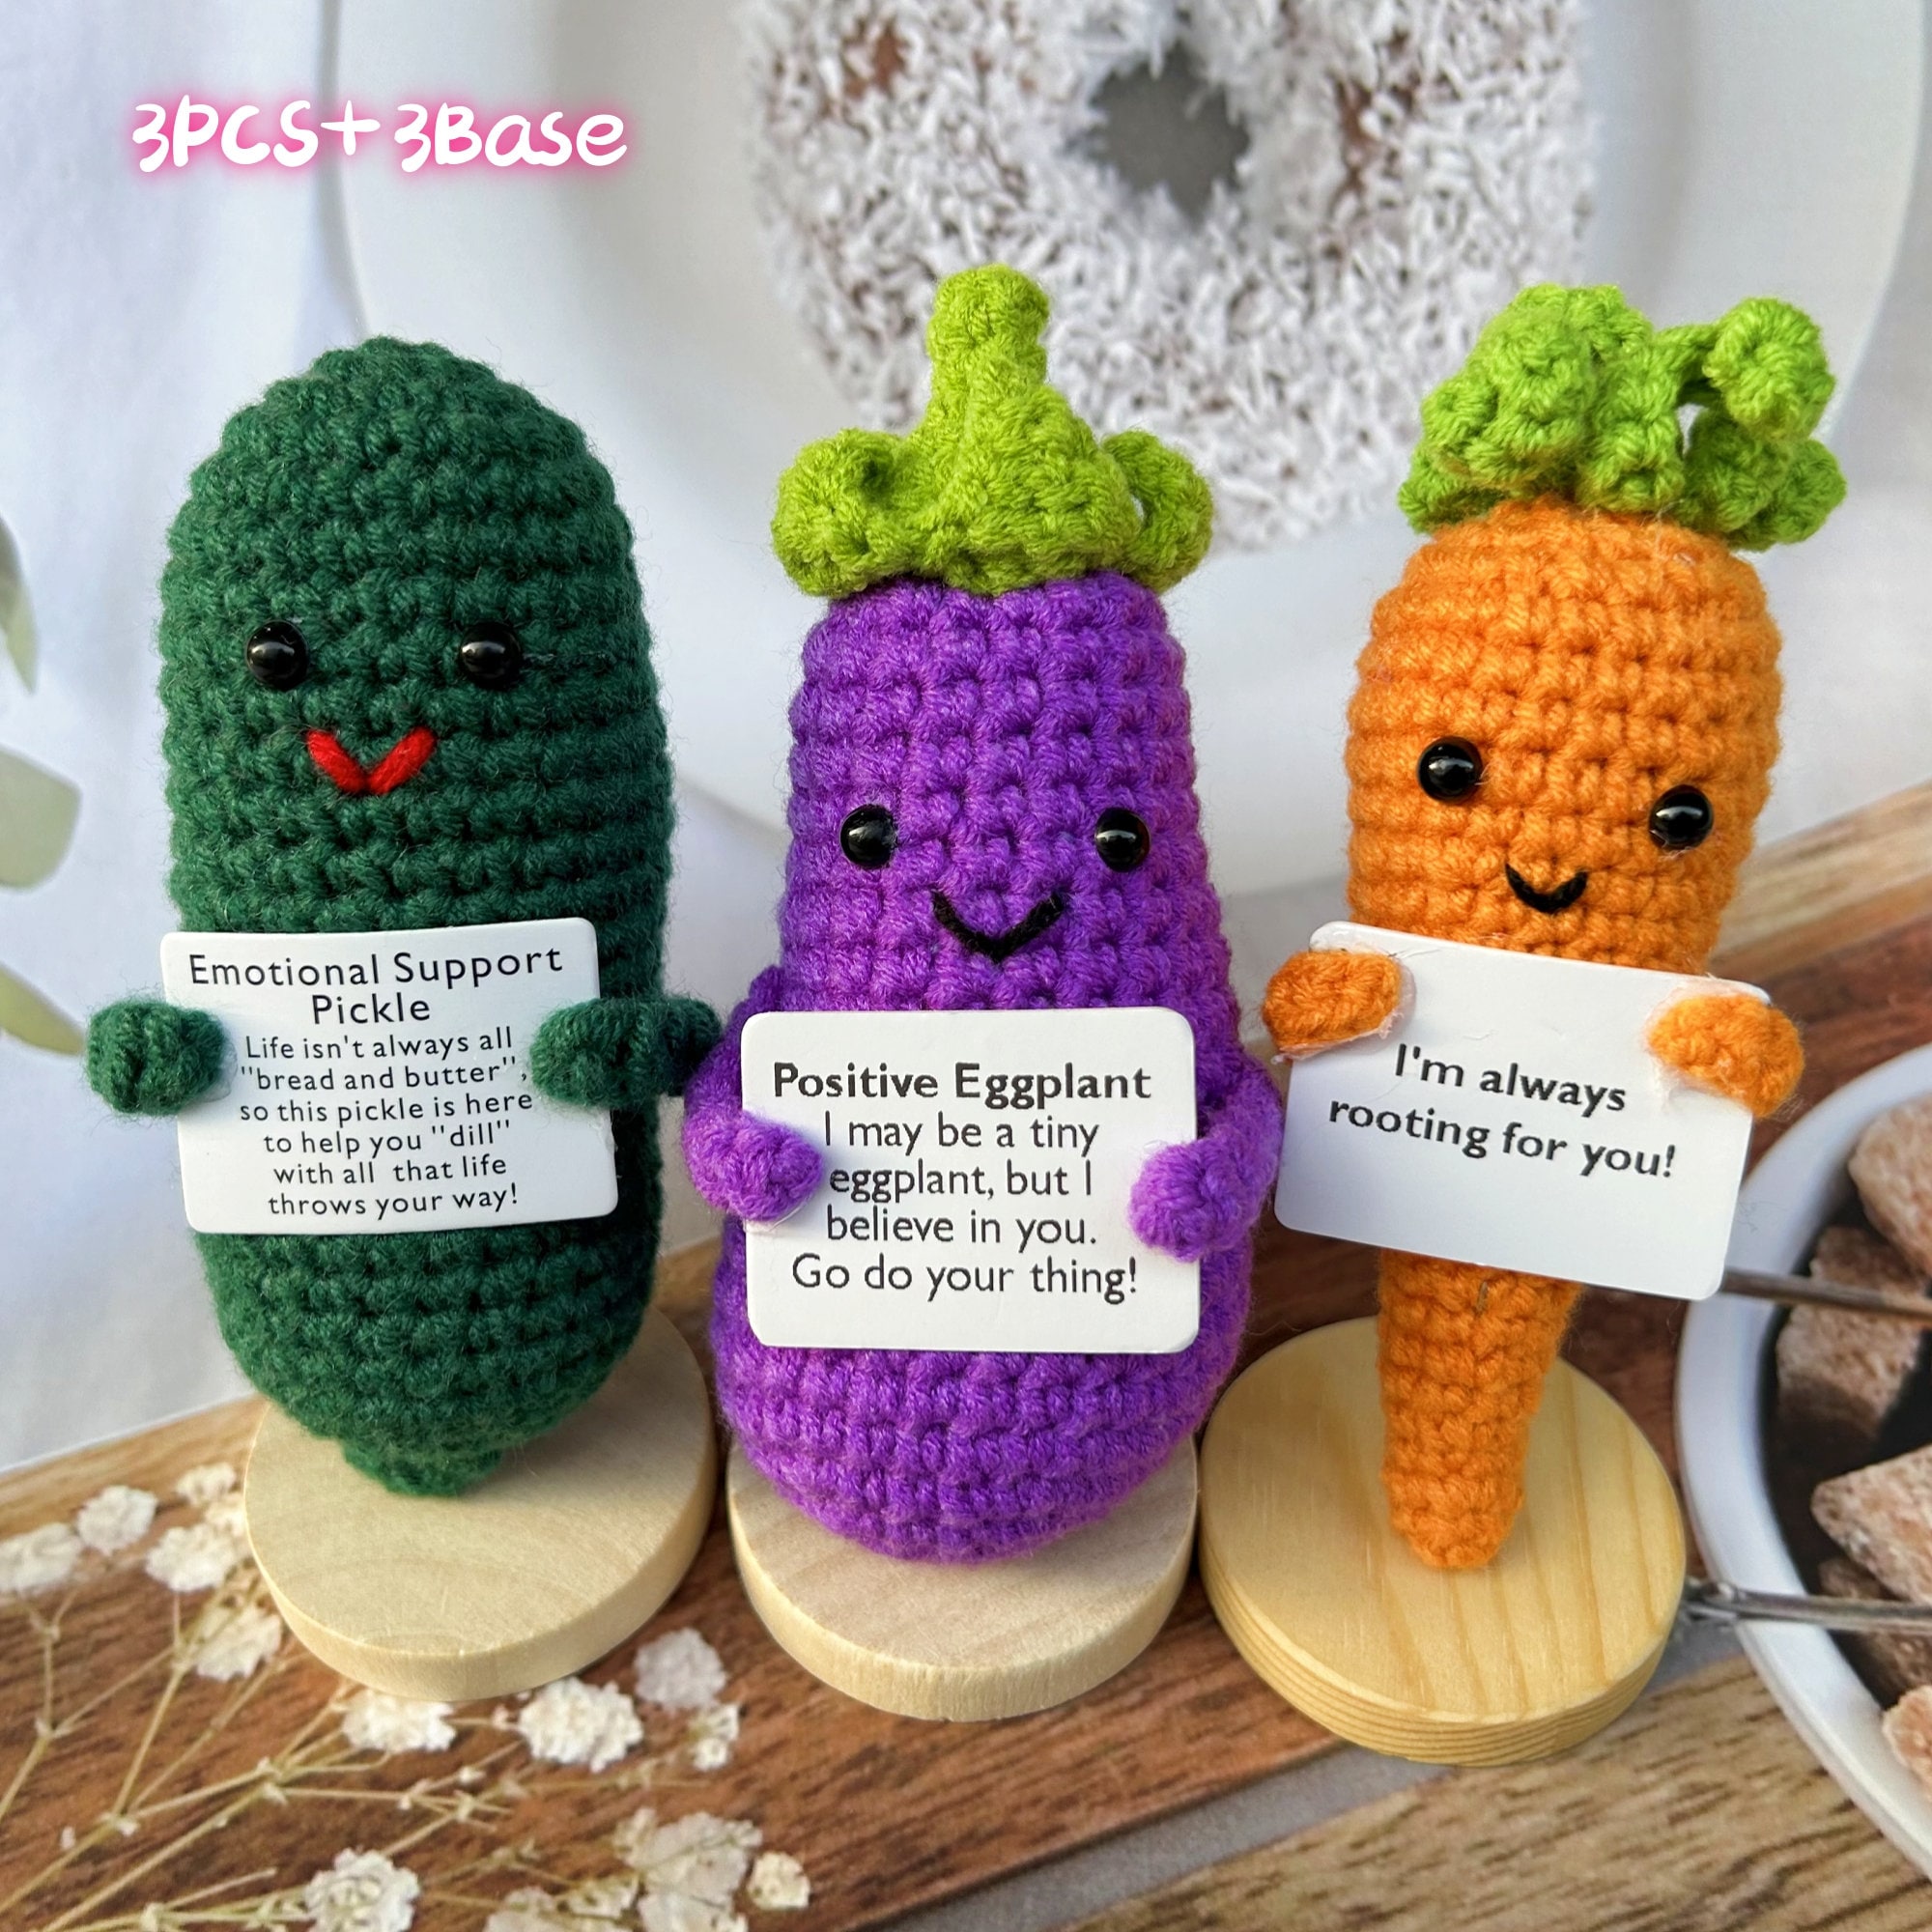 Handmade Emotional Support Pickle Crochet Smiley Sour Cucumber